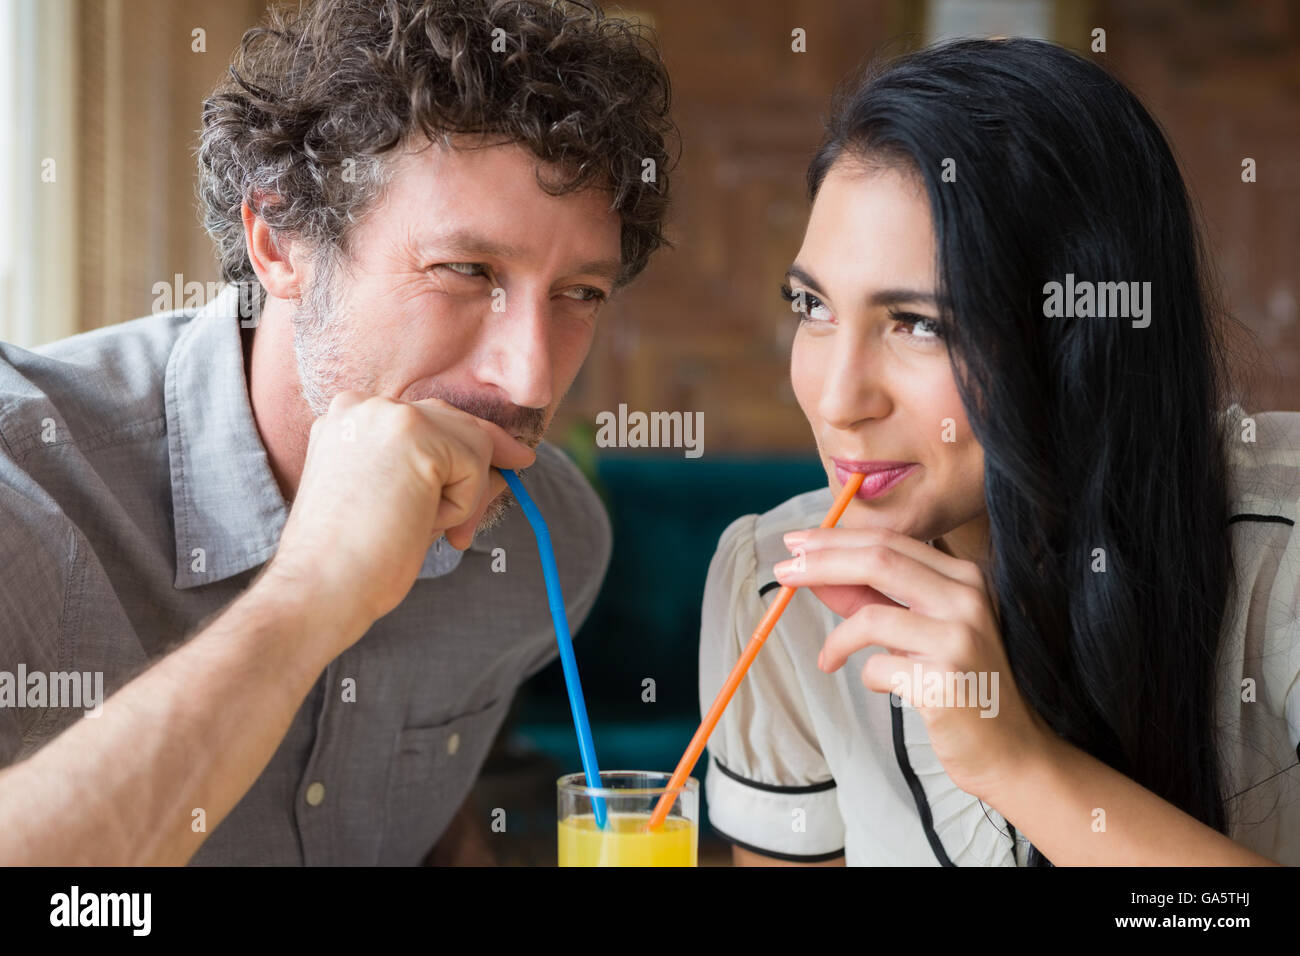 Couple having juice in cafeteria Stock Photo